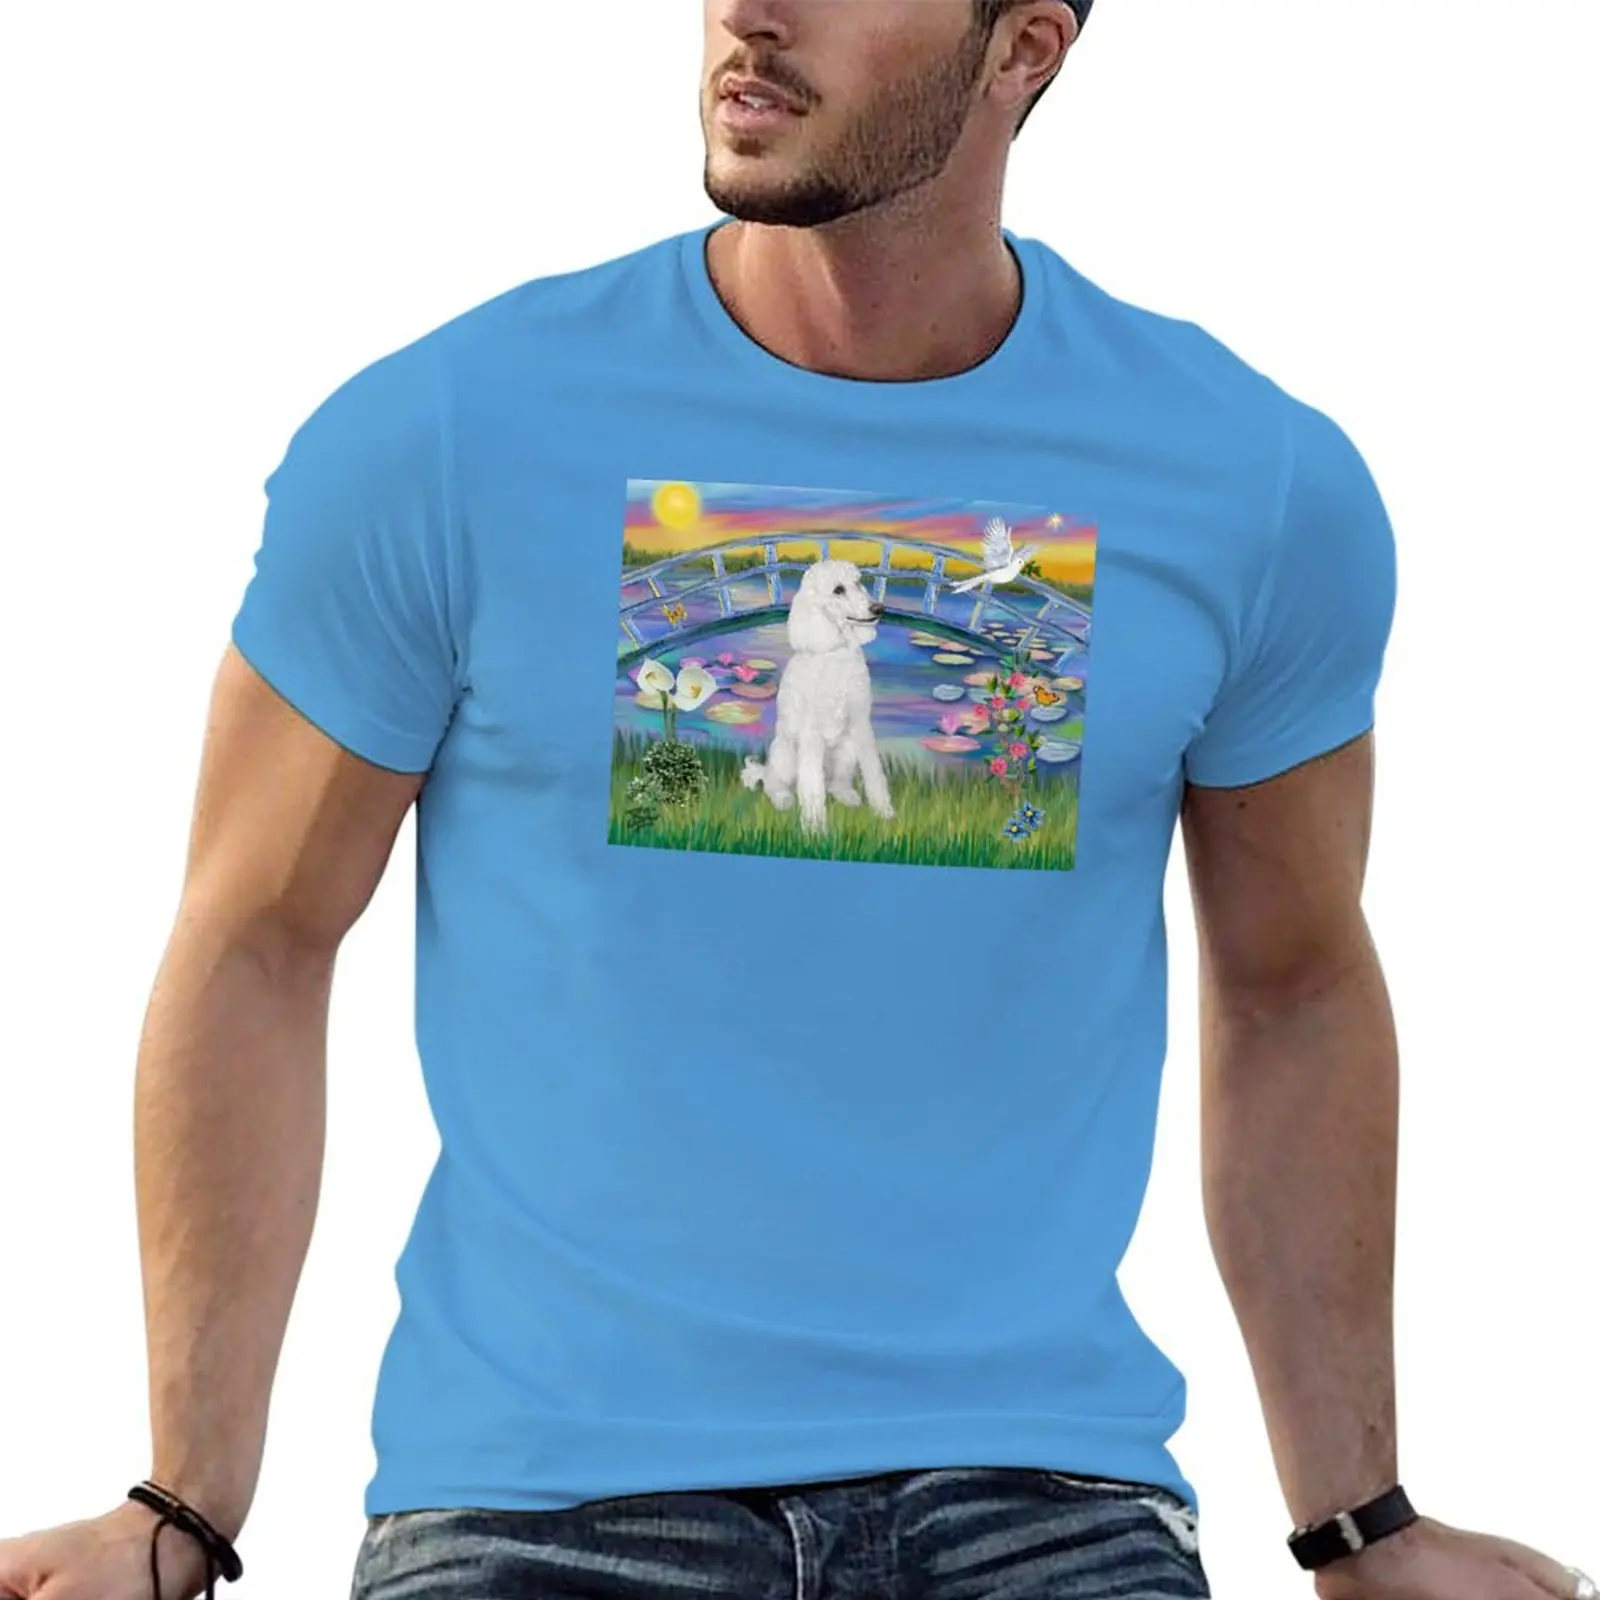 

Lily Pond Sunrise with a White Standard Poodle T-shirt summer top quick drying plain customs mens champion t shirts